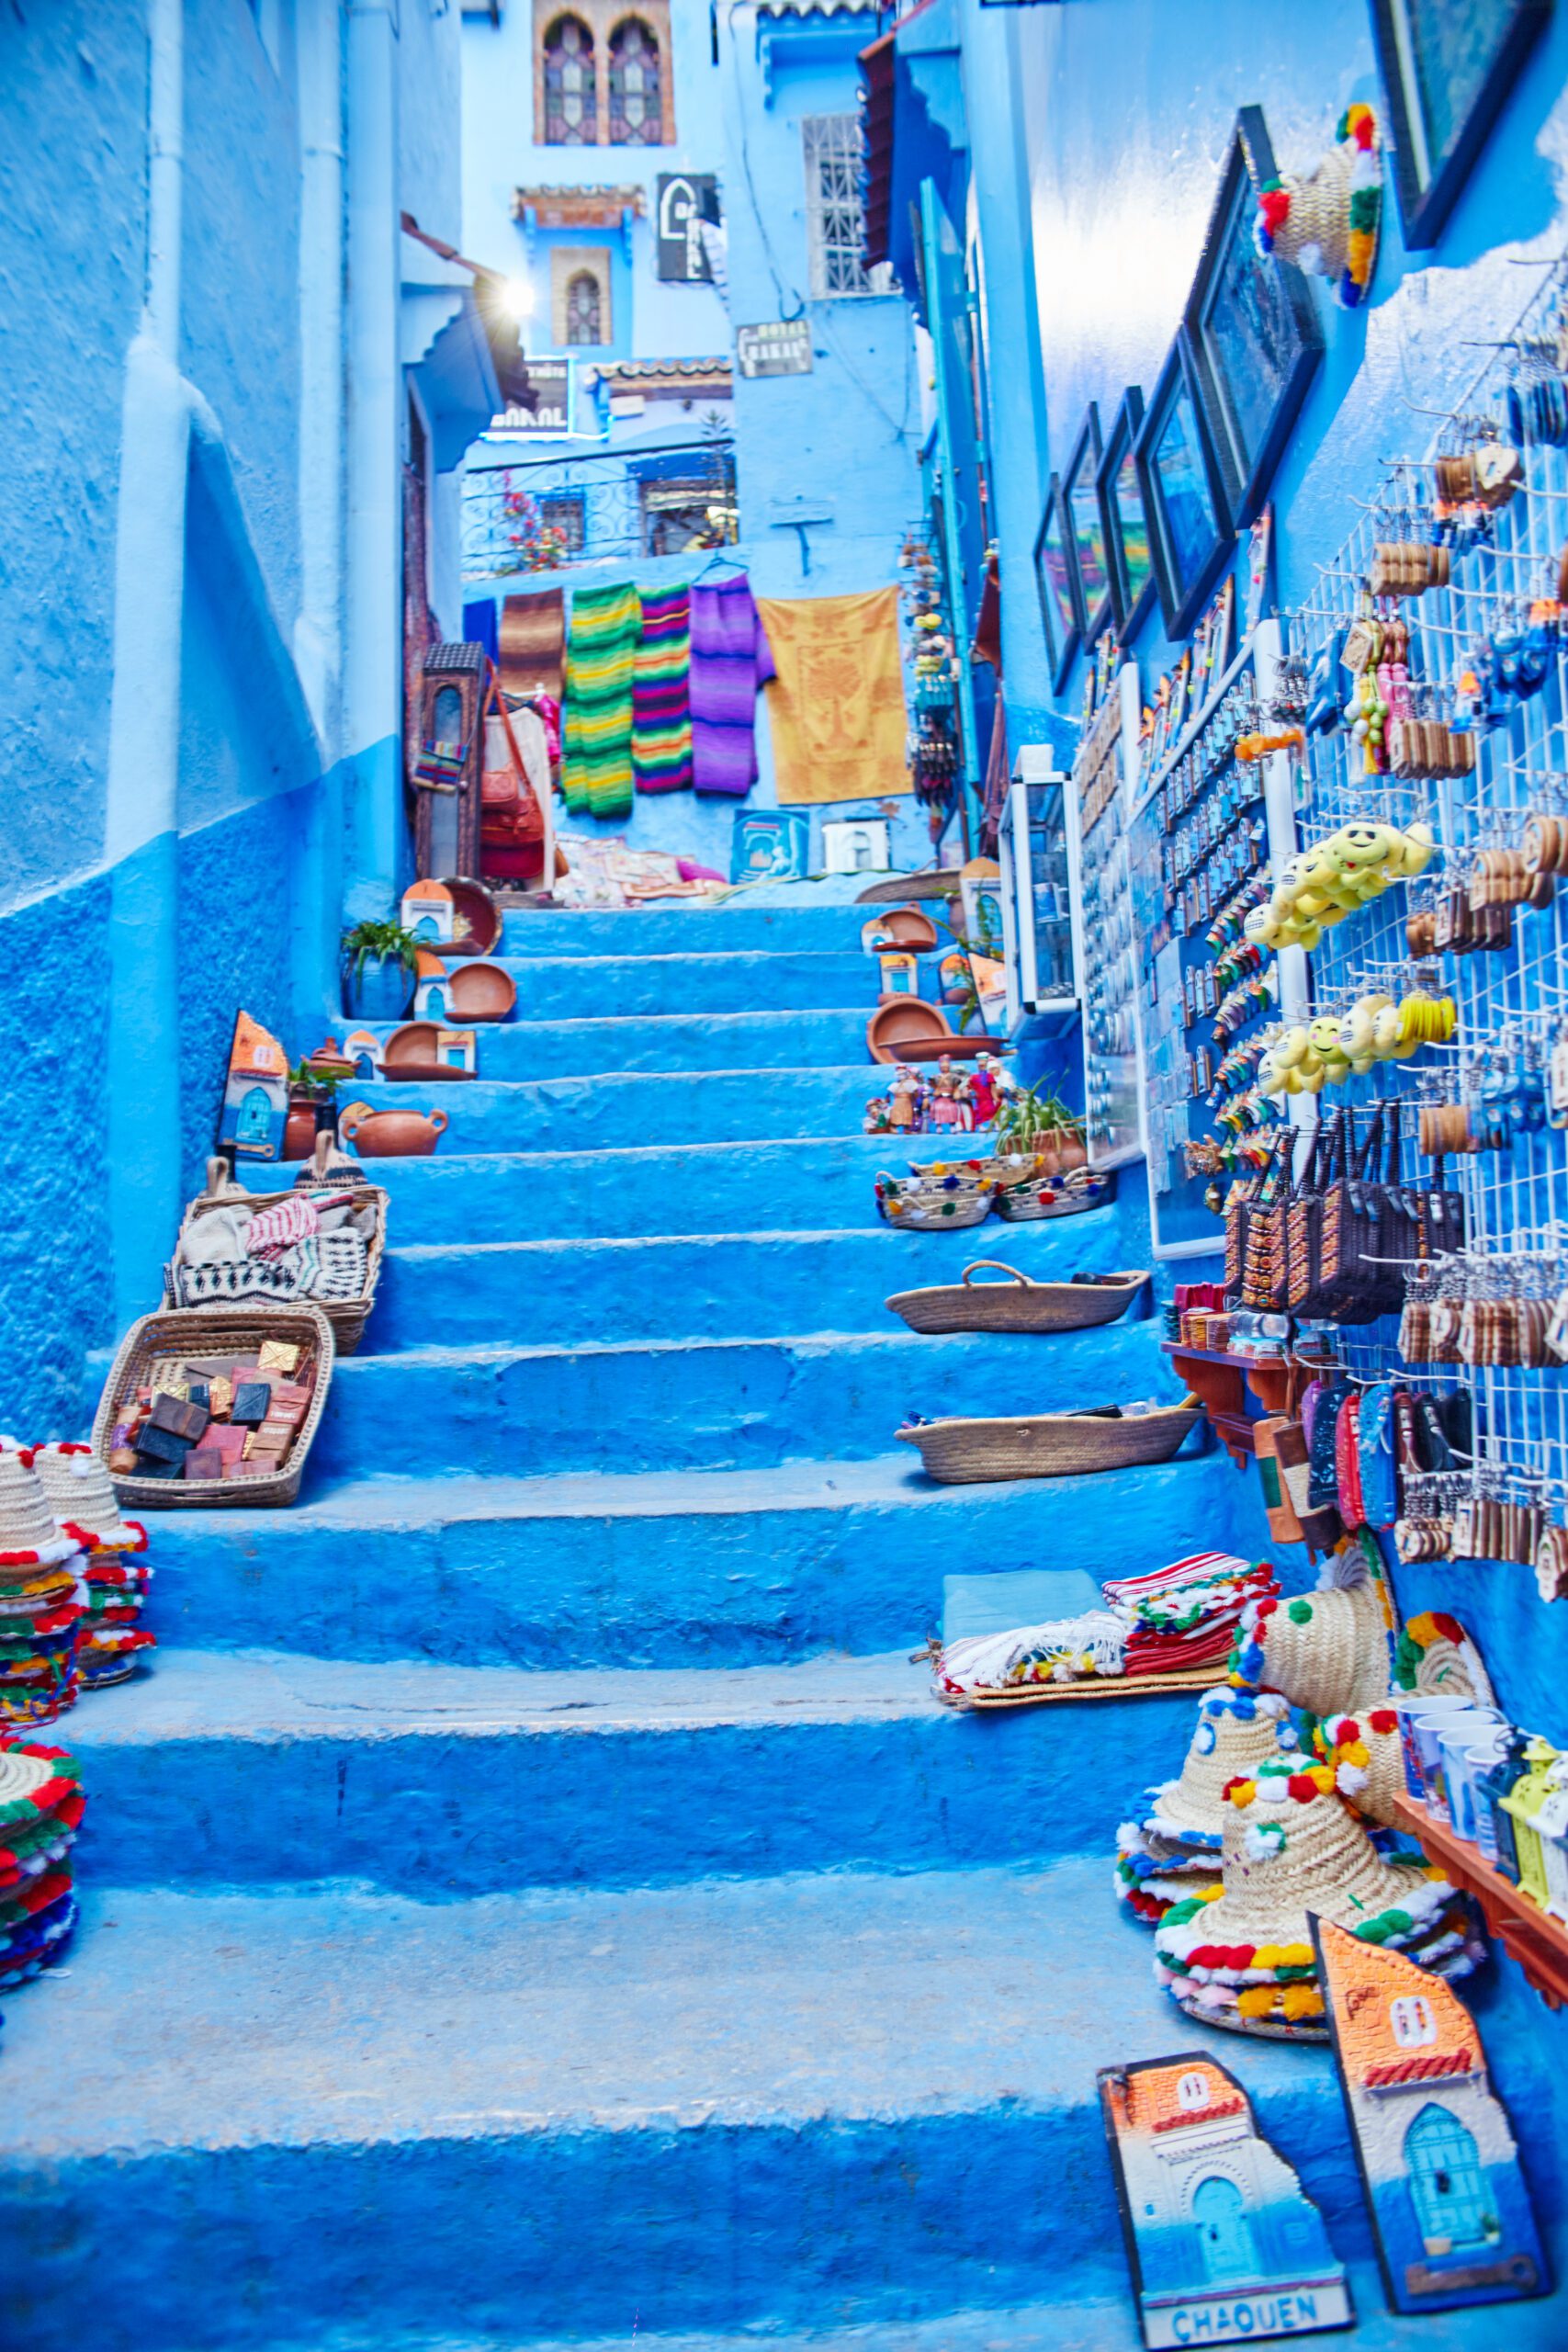 Many different Souvenirs and gifts in the streets of Chefchaouen. Paintings, carpets, clothing and handmade products on the streets of Morocco. Morocco, Chefchaouen 13 Dec 2017